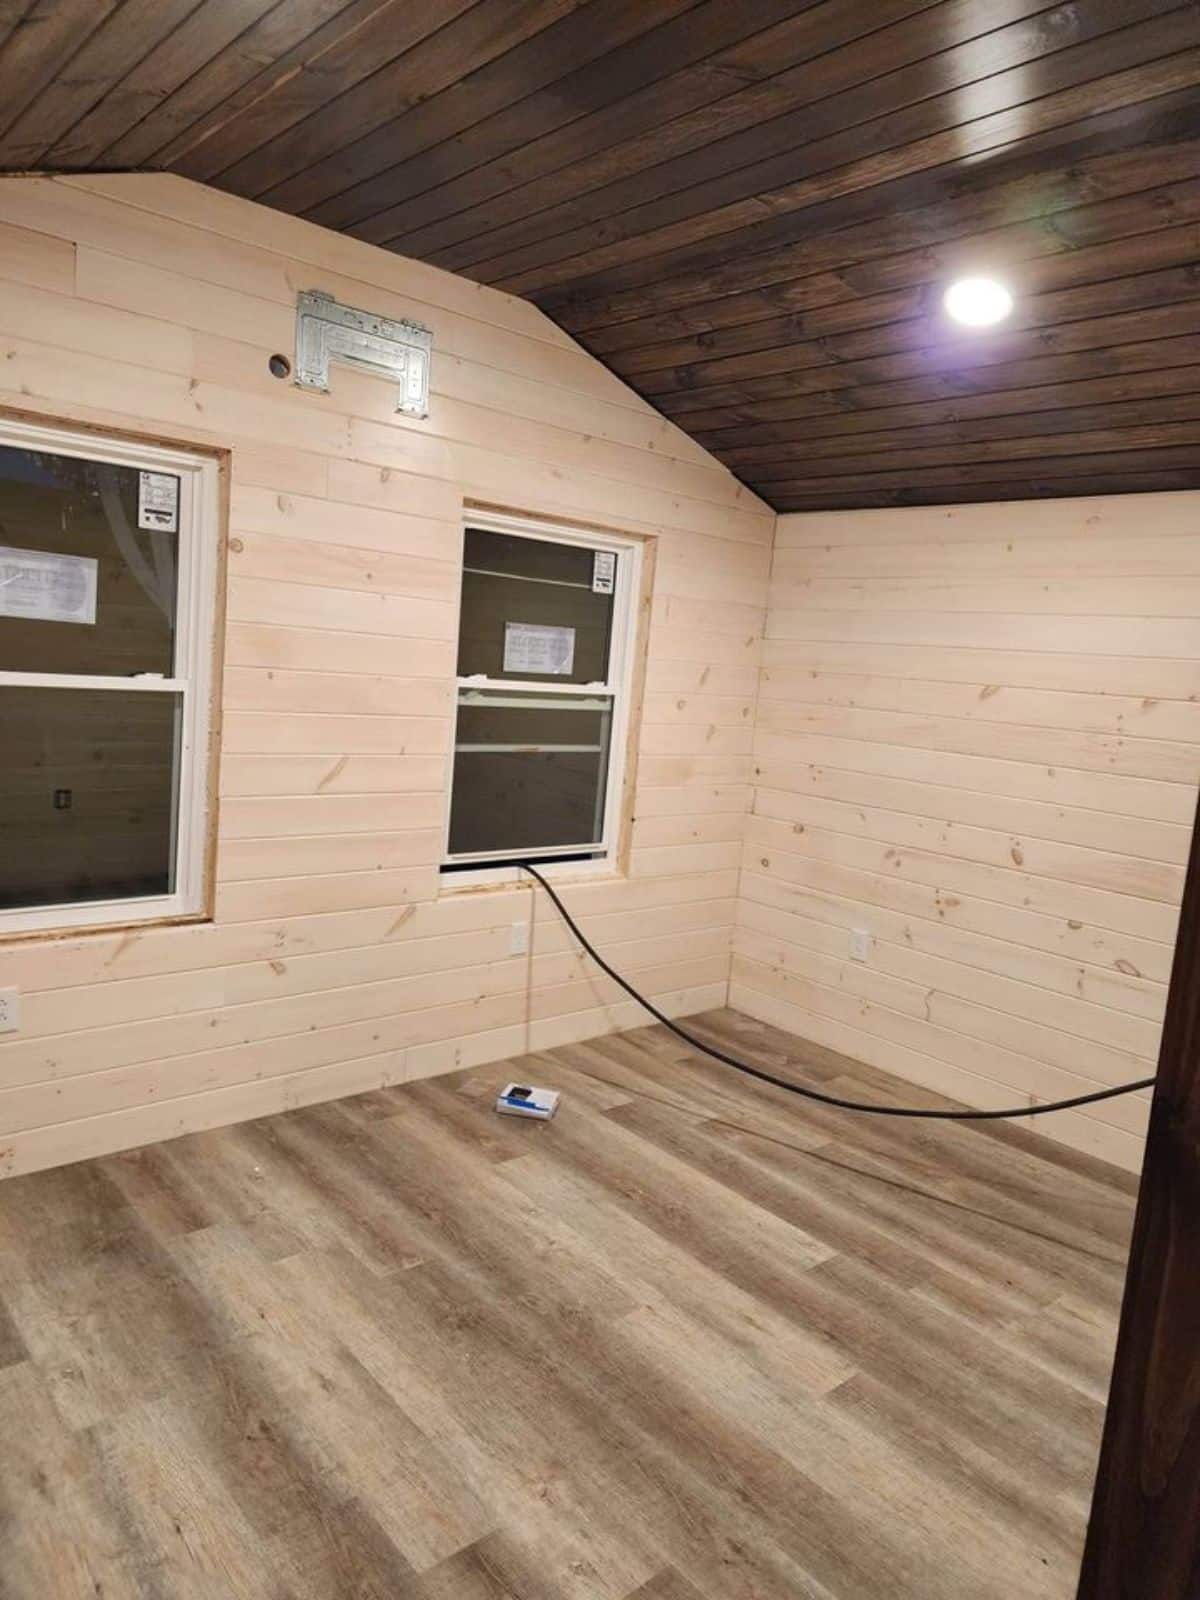 Bedroom of Custom Built Tiny Home is spacious